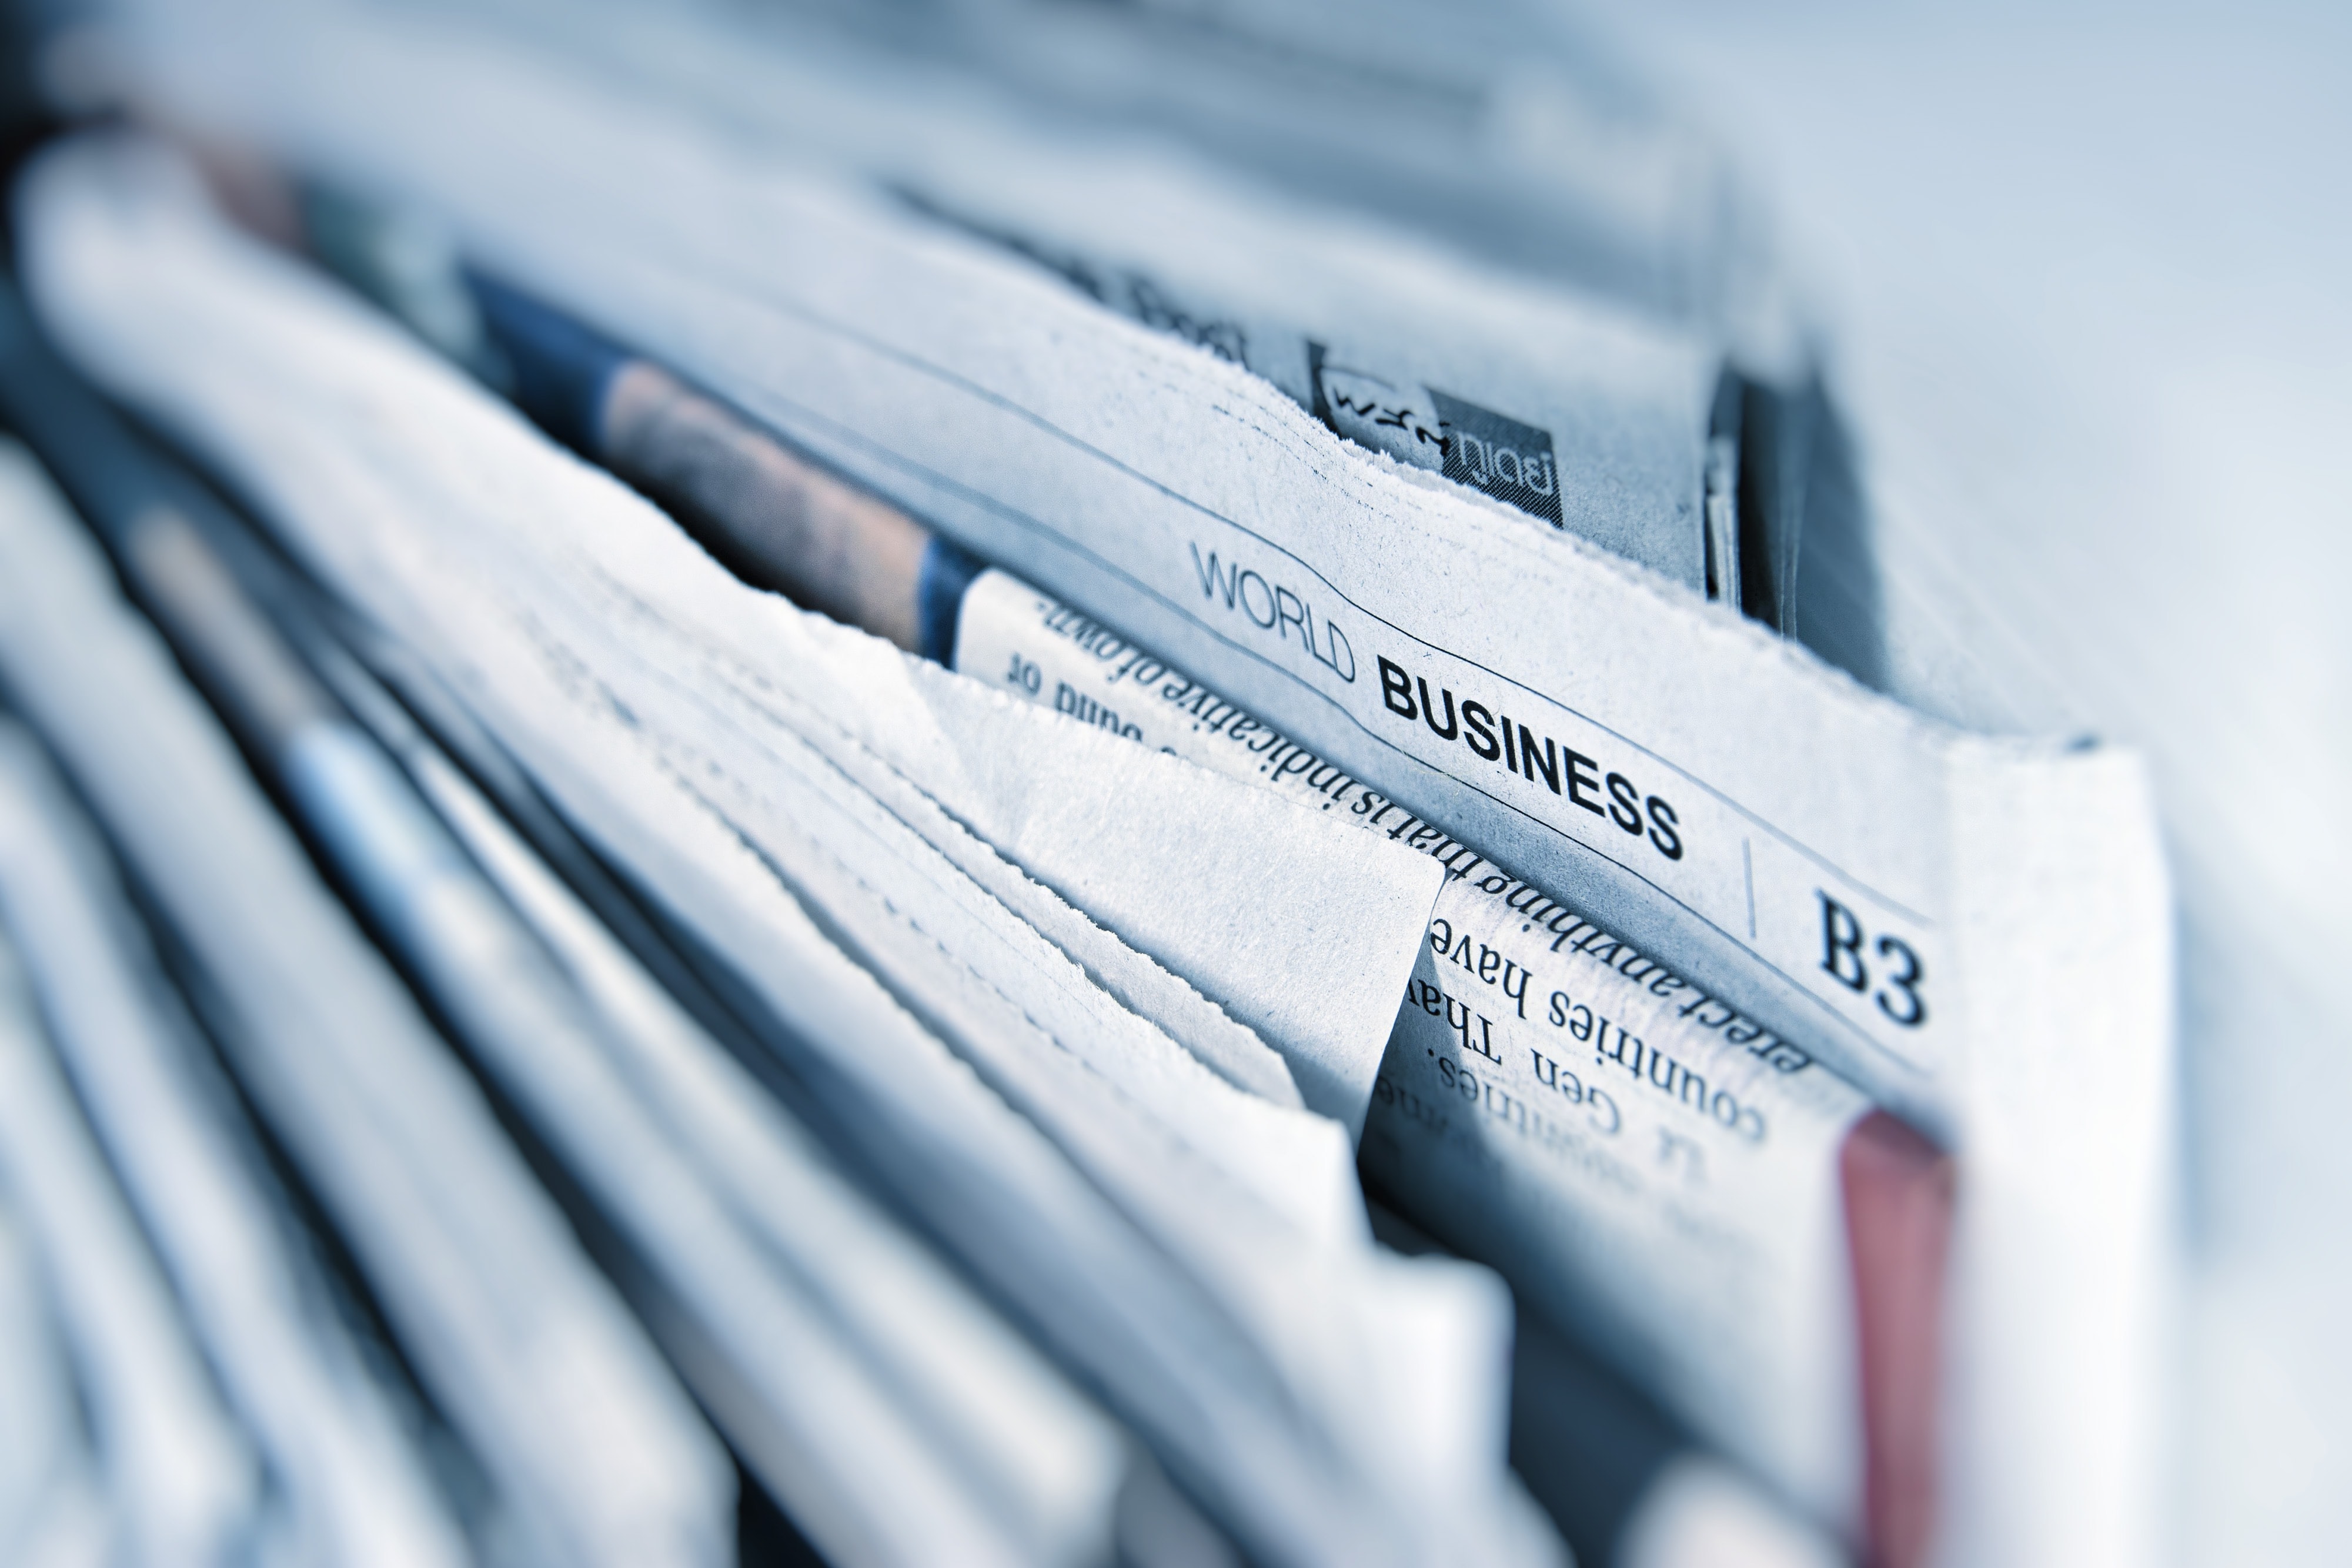 Several newspapers stacked together with the Business section visible